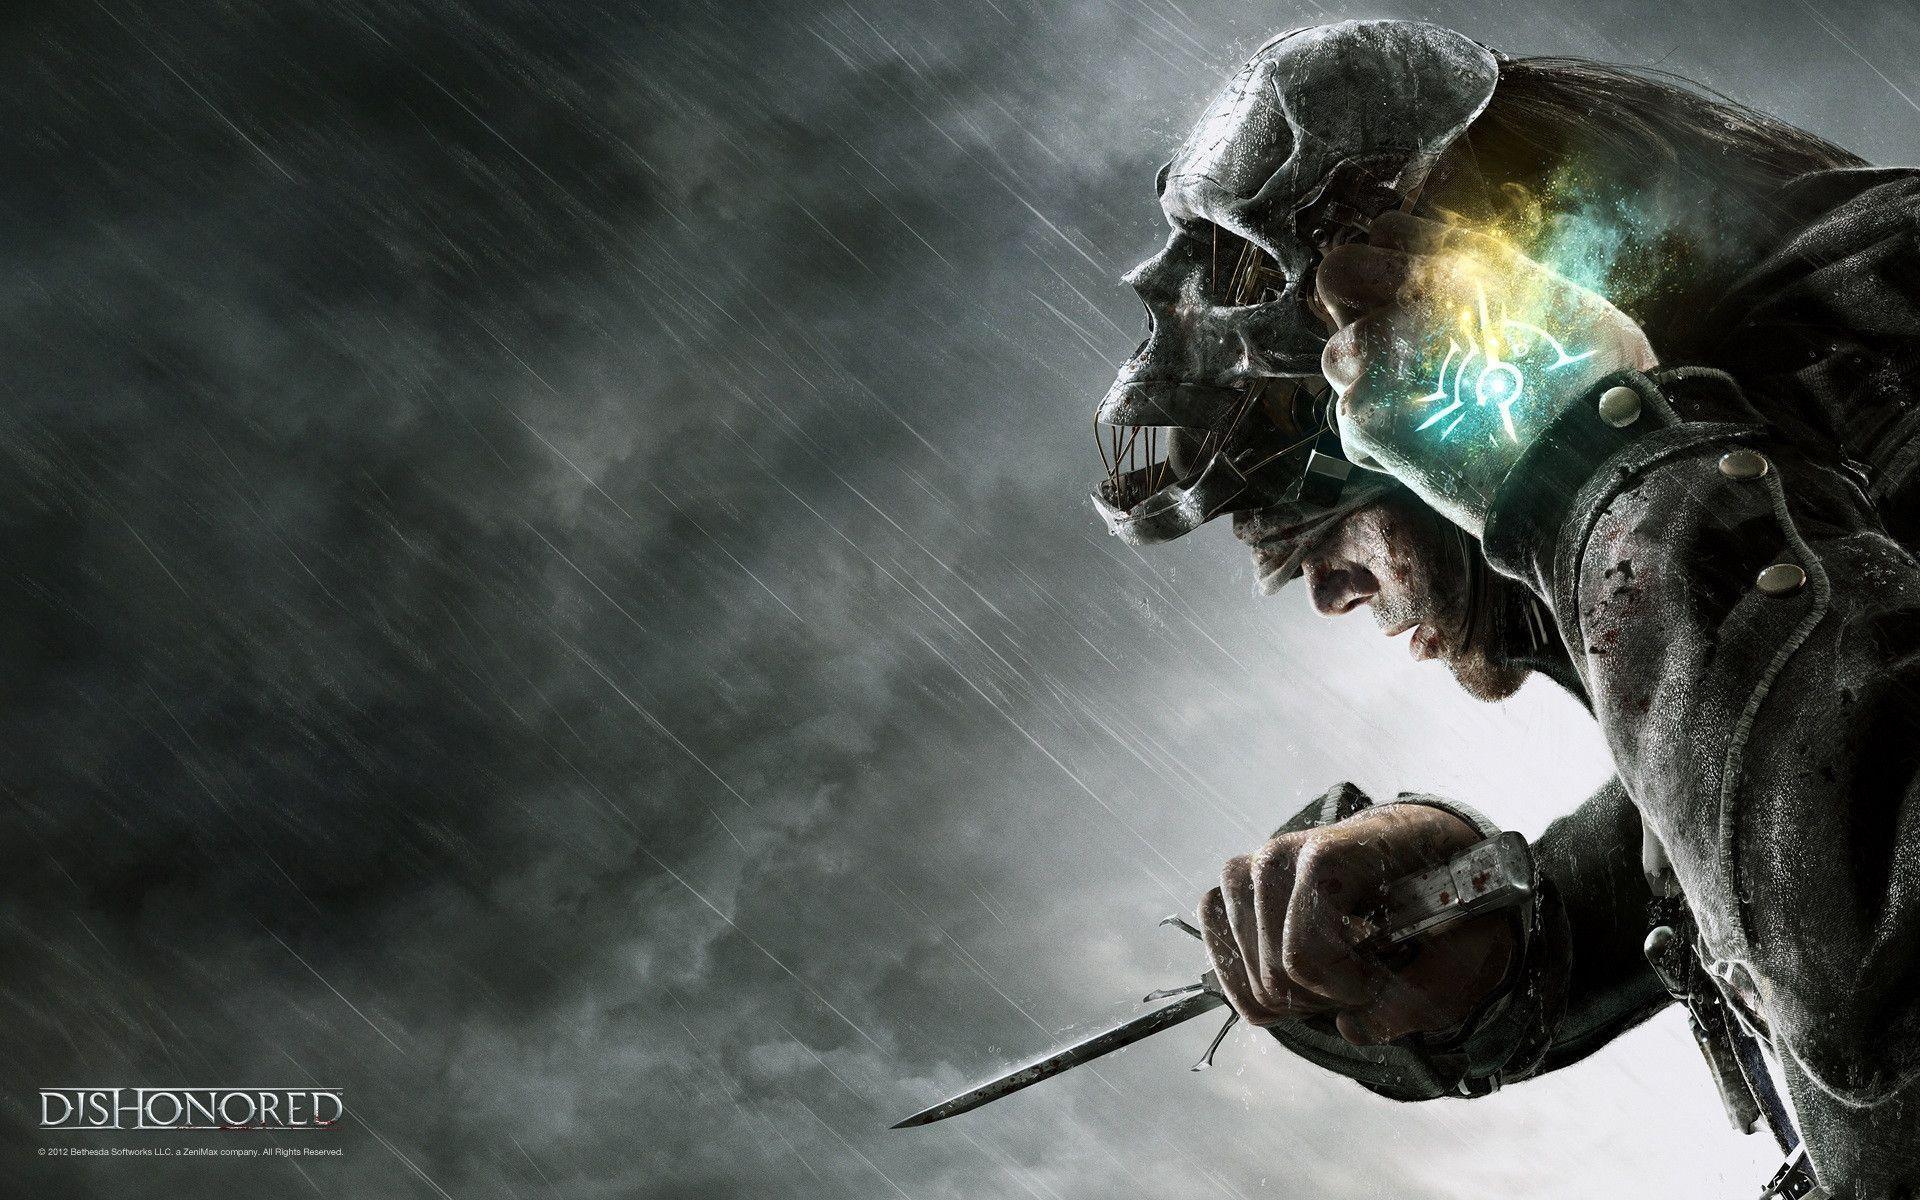 Dishonored Video Game Hd Wallpapers - Video Game Desktop Backgrounds - HD Wallpaper 